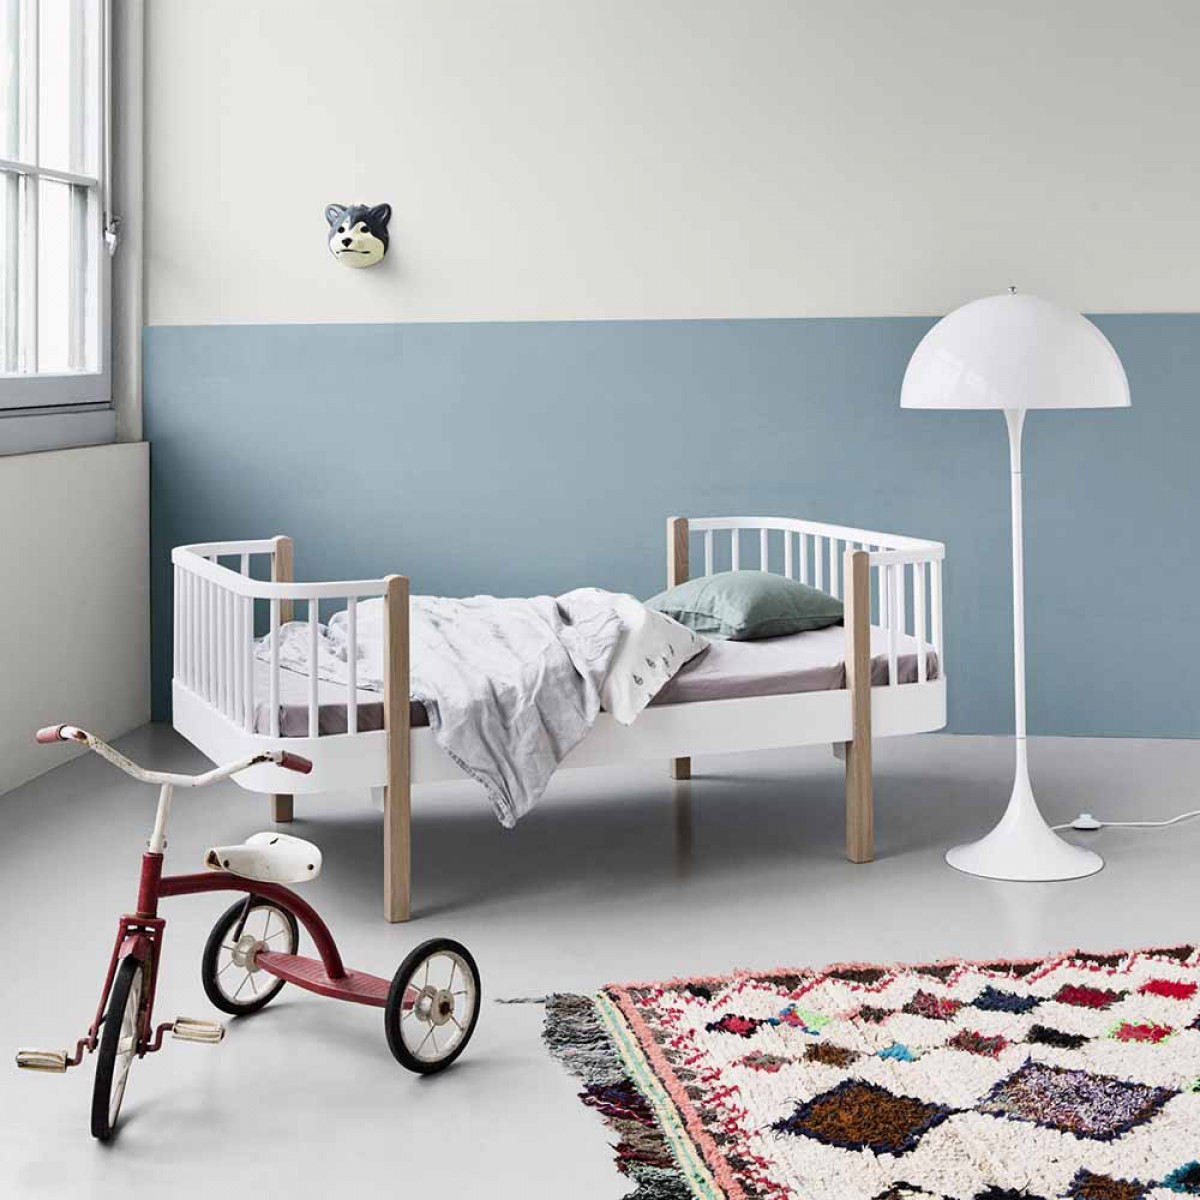 Danish designed Beds for your most loved ones!